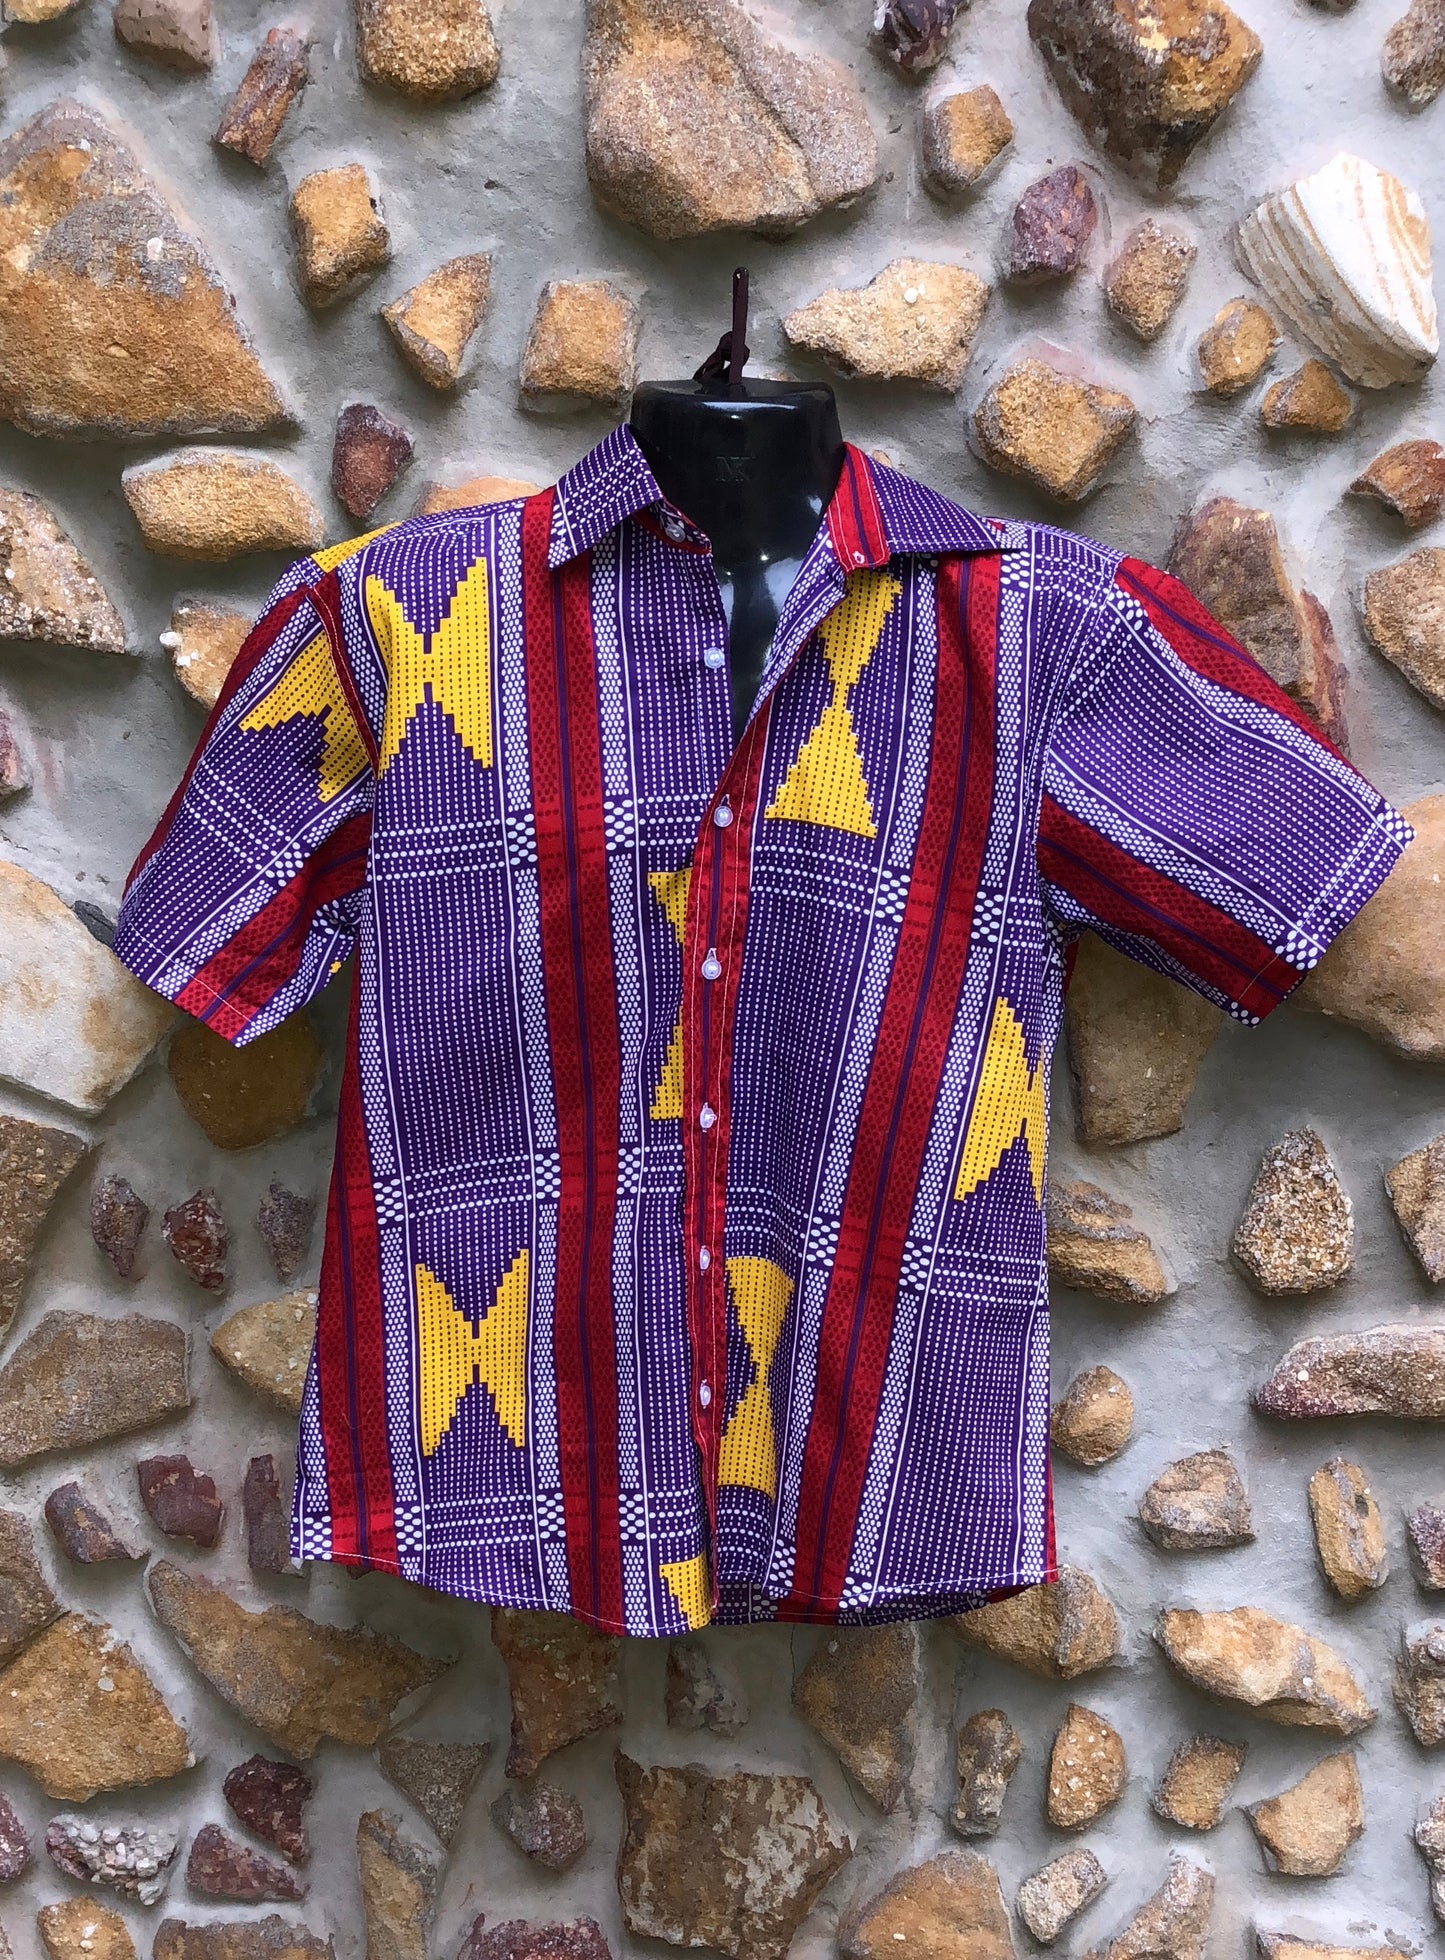 XXL Love Shirt - Purple, Yellow and Red African Print